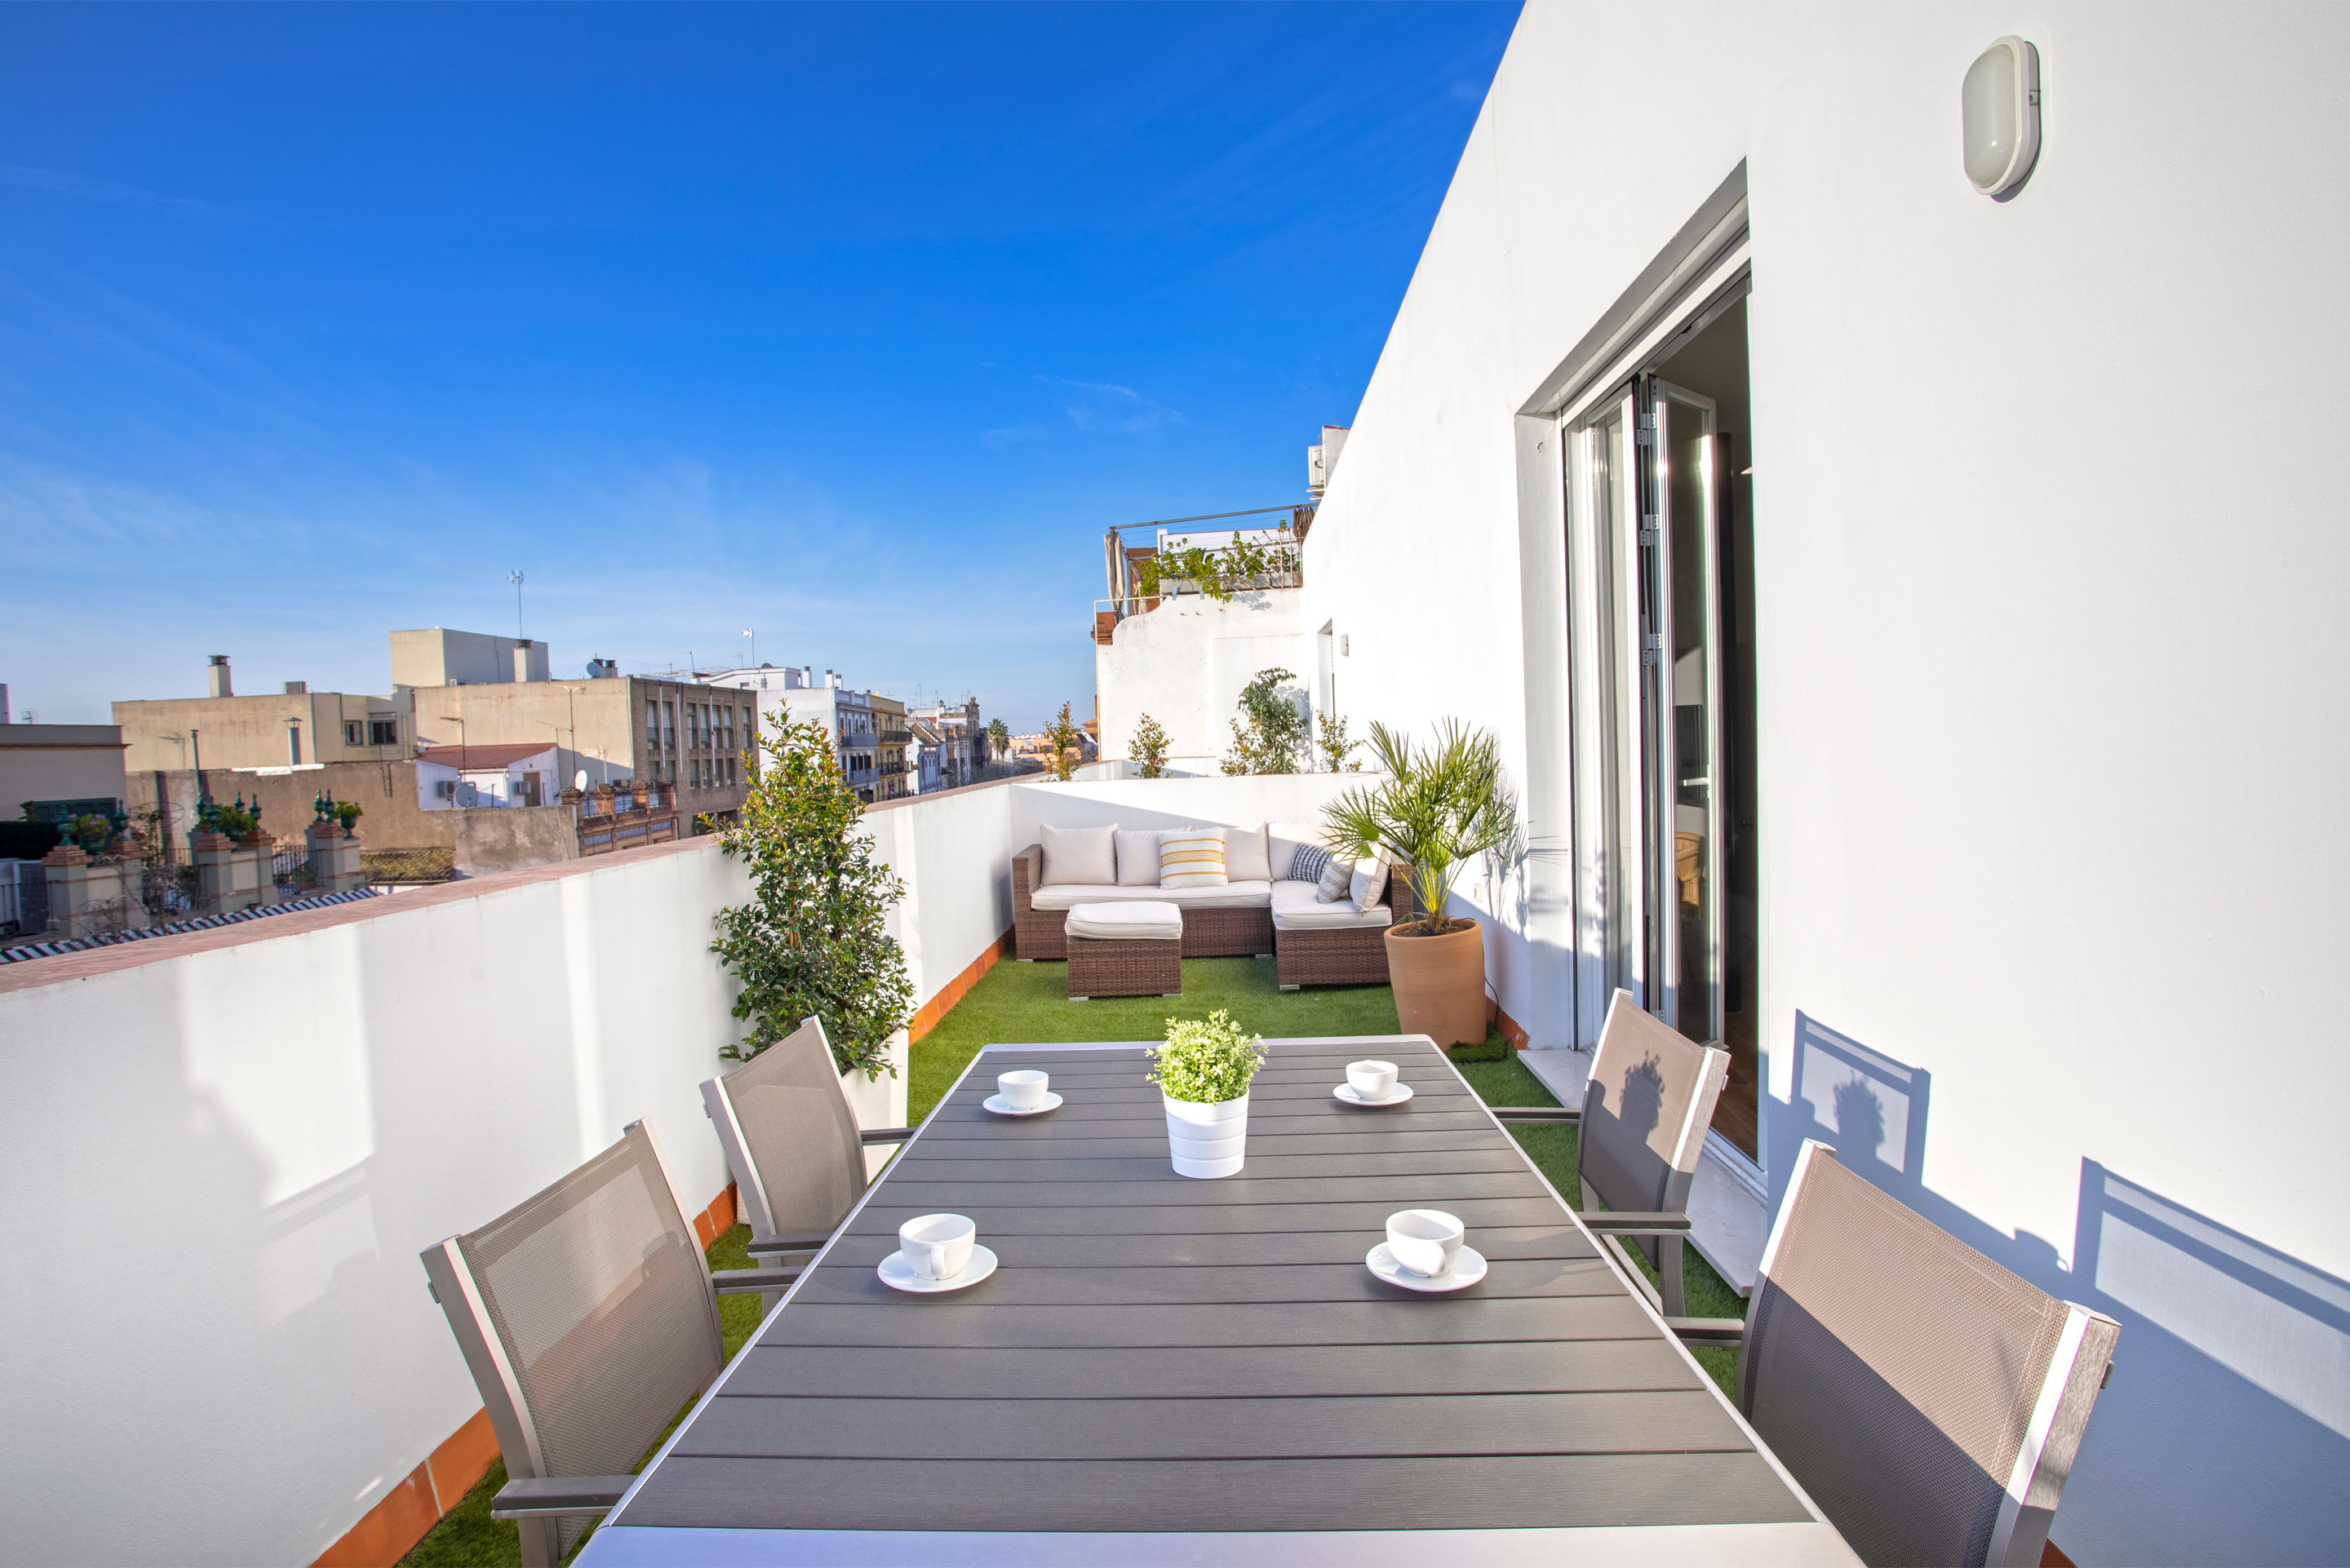 Property Image 1 - Design penthouse studio with private terrace and views. Recaredo XII